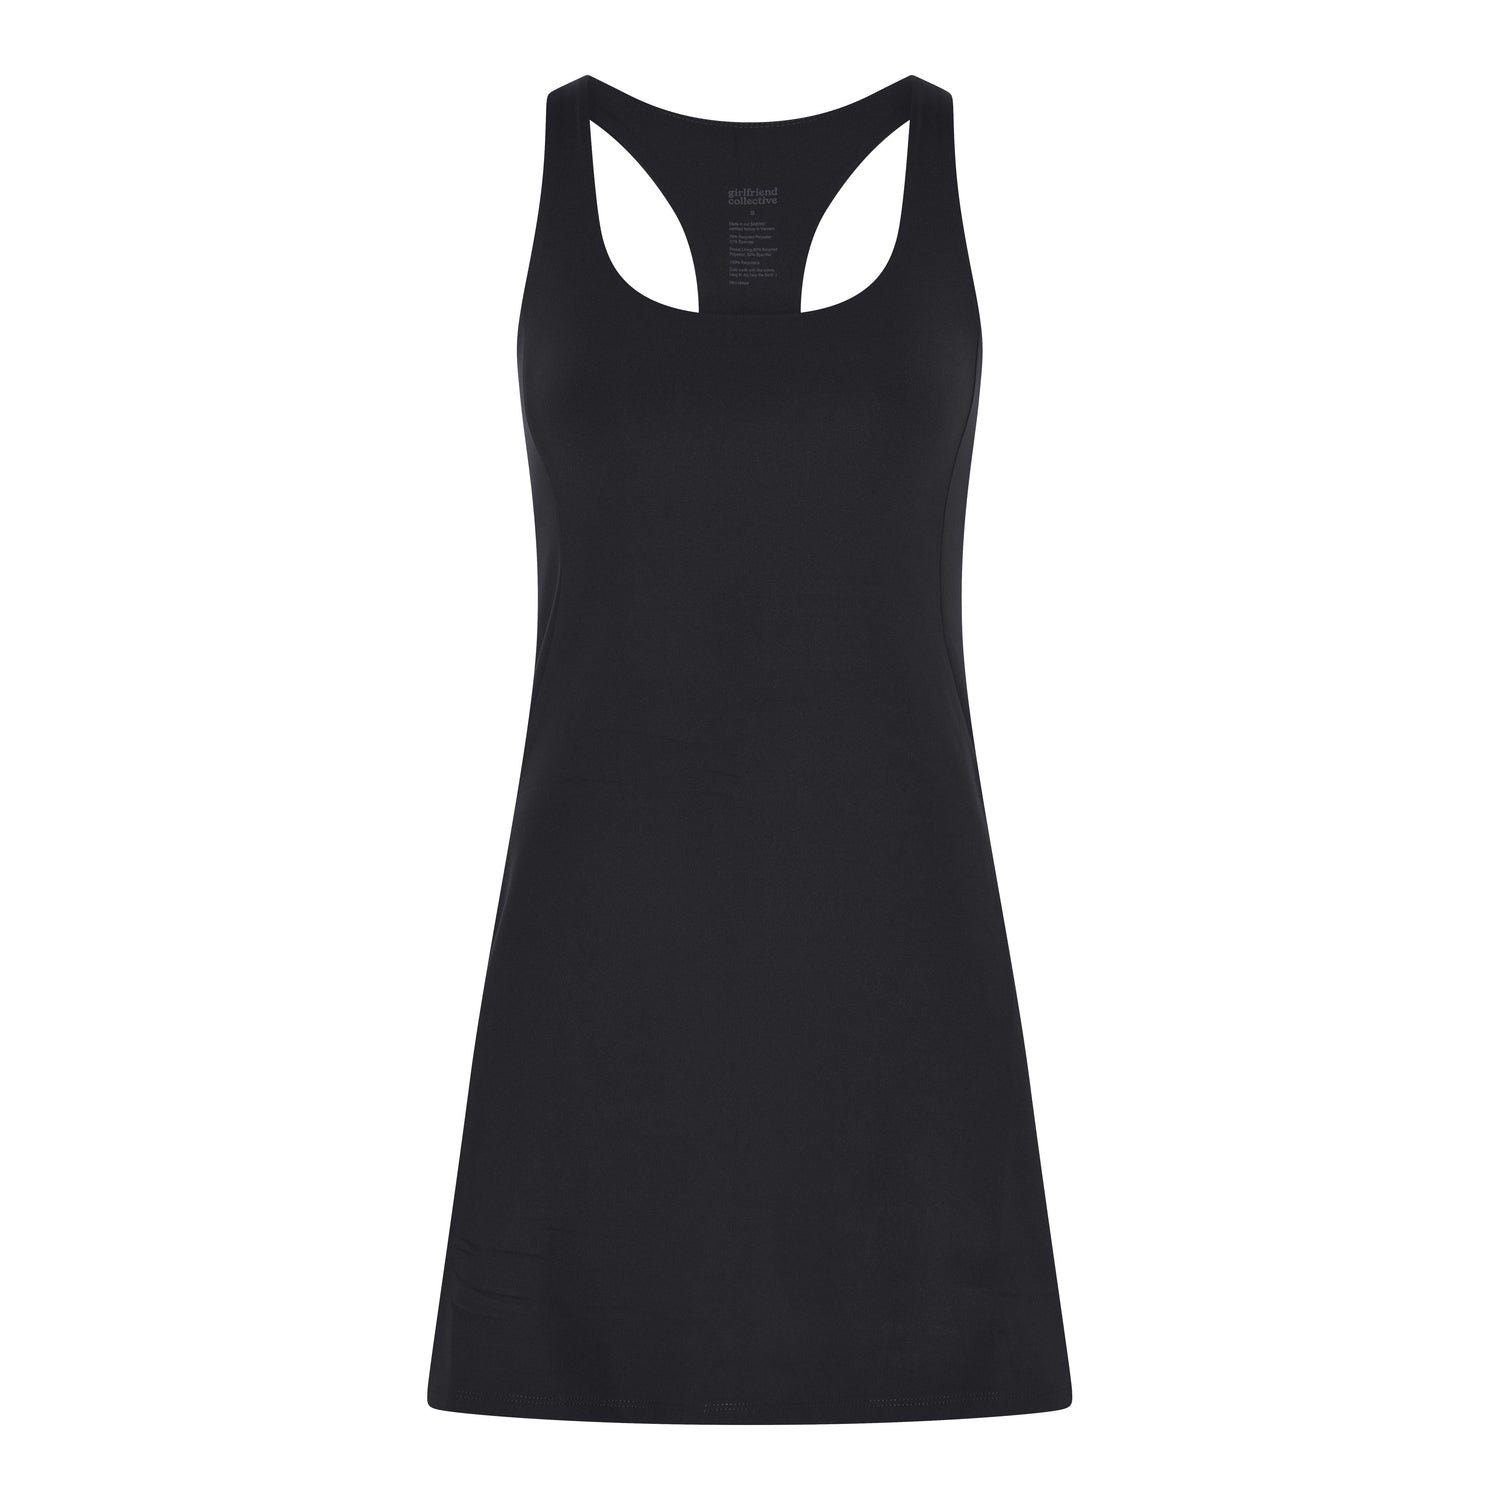 Girlfriend Collective Paloma Dress - Made from Recycled Plastic Bottles Black Dress